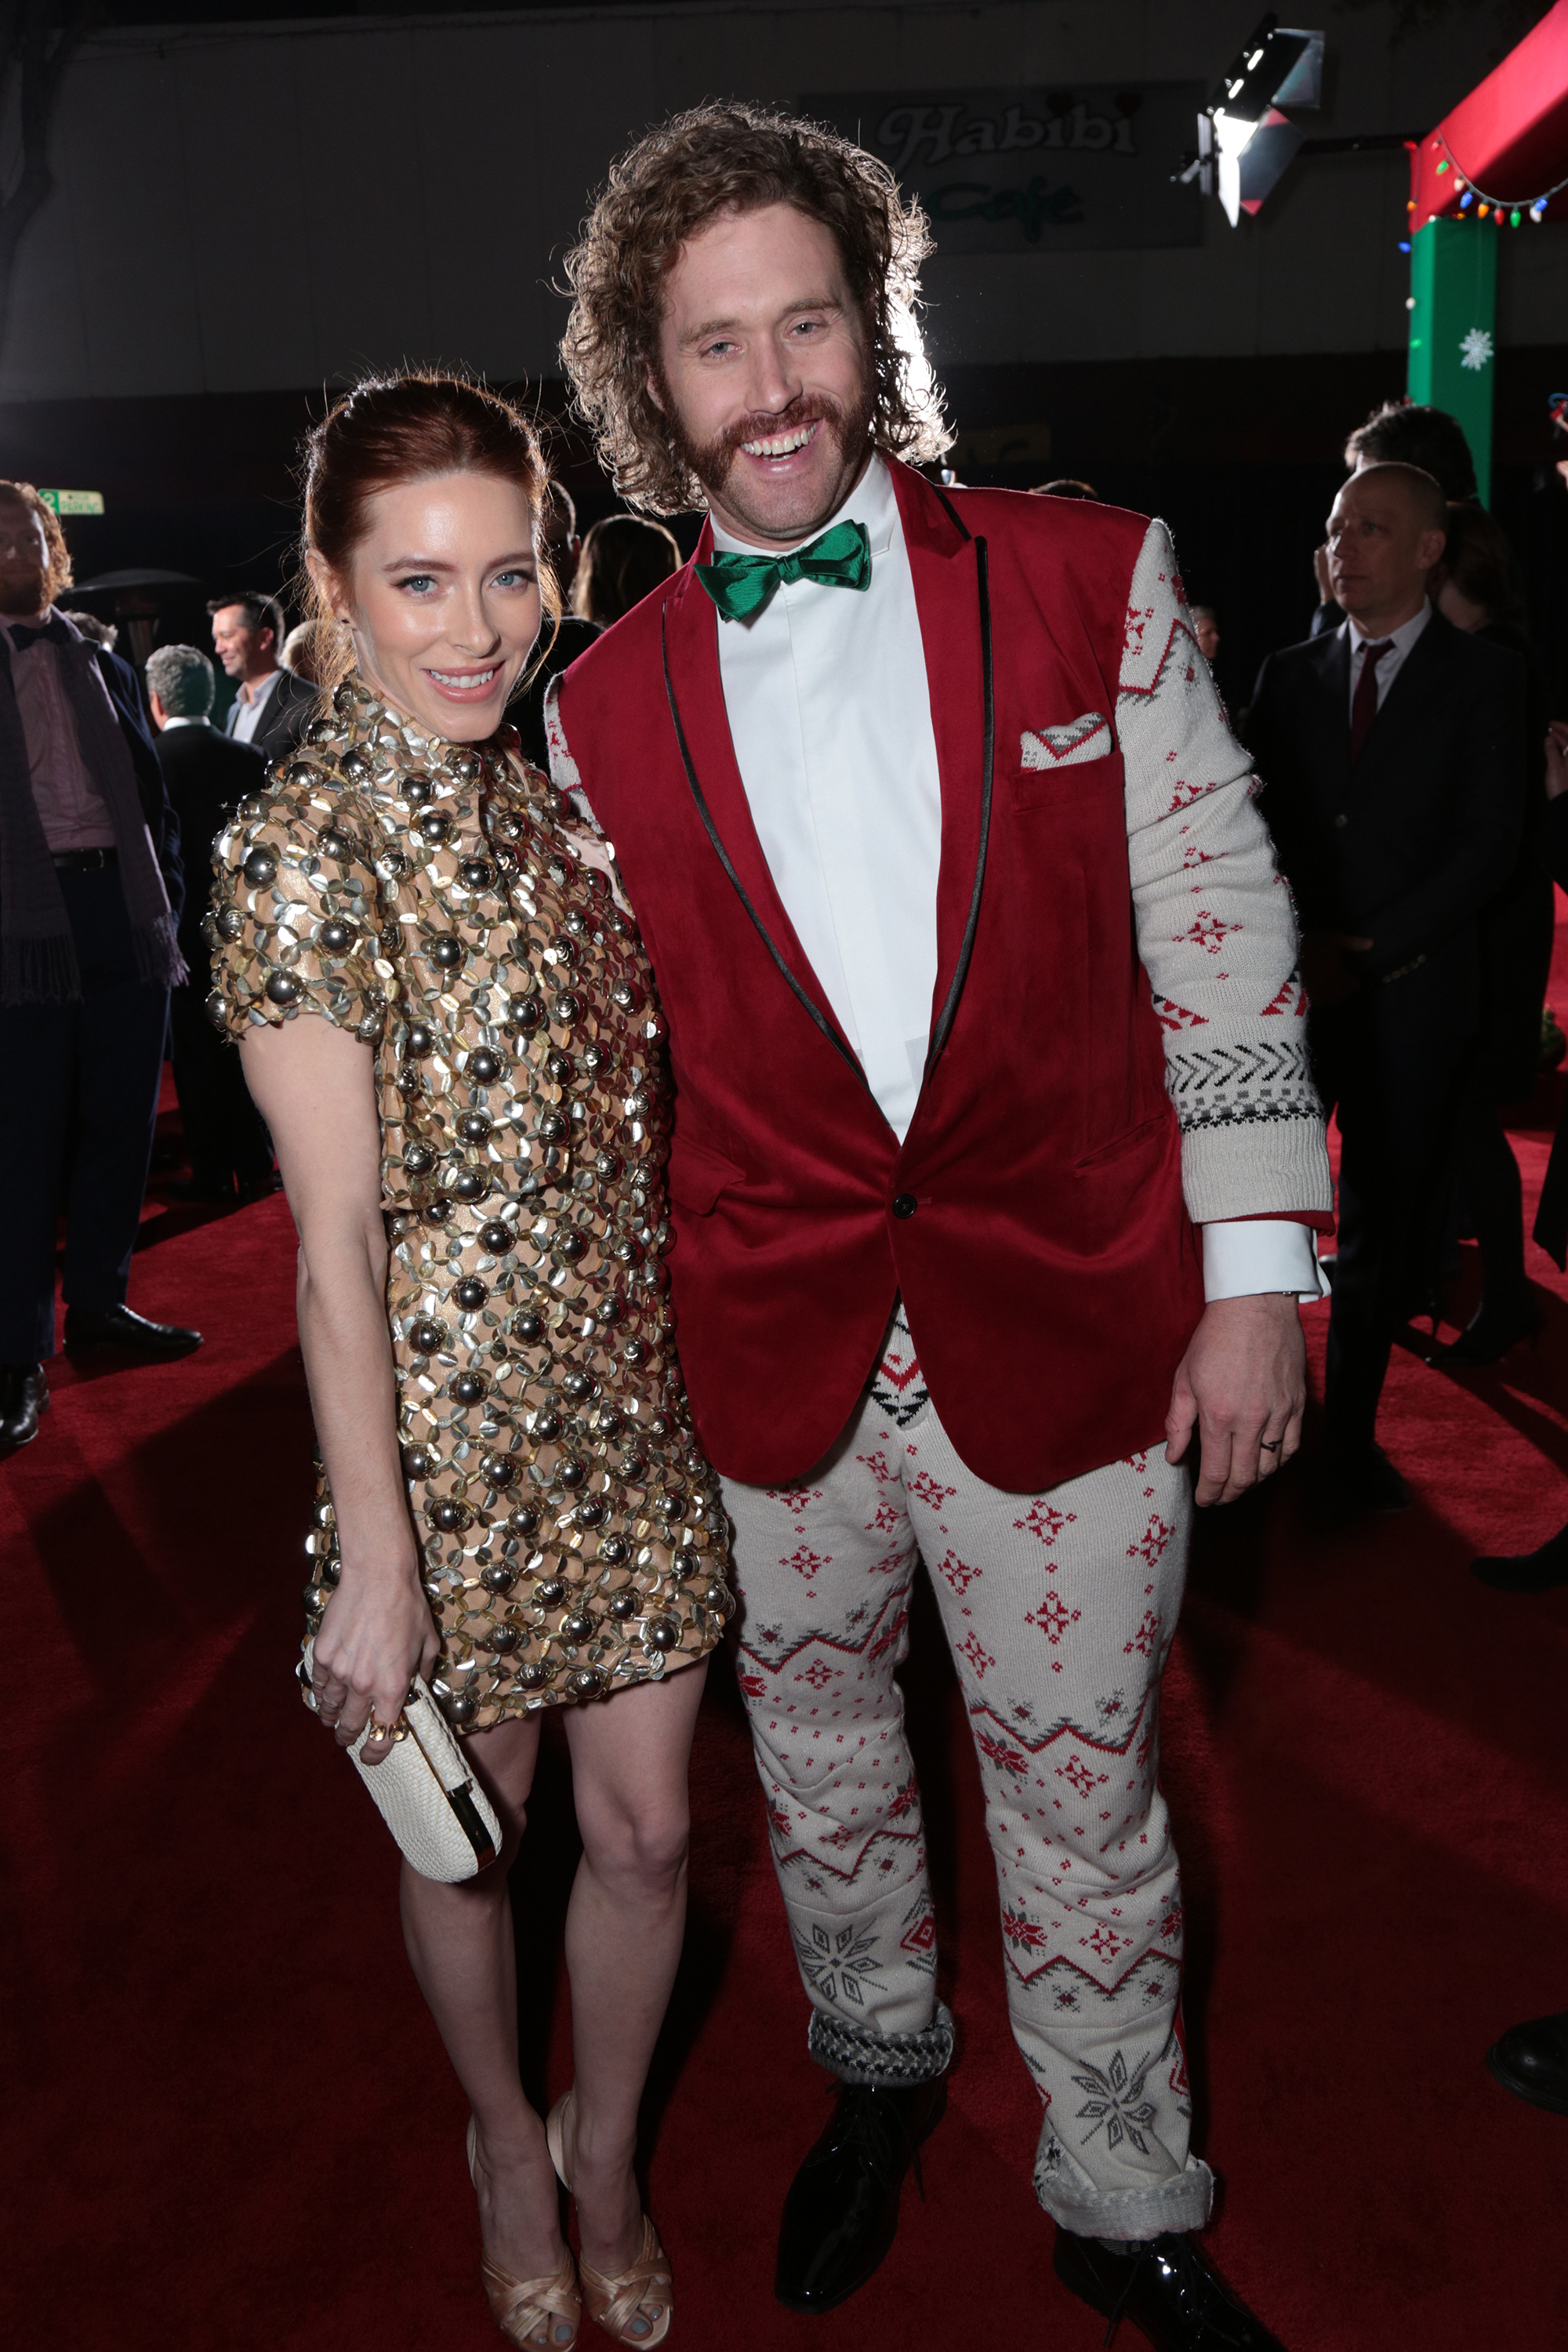 Kate Miller and T.J. Miller pose as Paramount Pictures presents the Los Angeles premiere of "Office Christmas Party" at the Regency Village Theater in Los Angeles, CA on Wednesday, December 7, 2016  (Photo: Alex J. Berliner / ABImages)